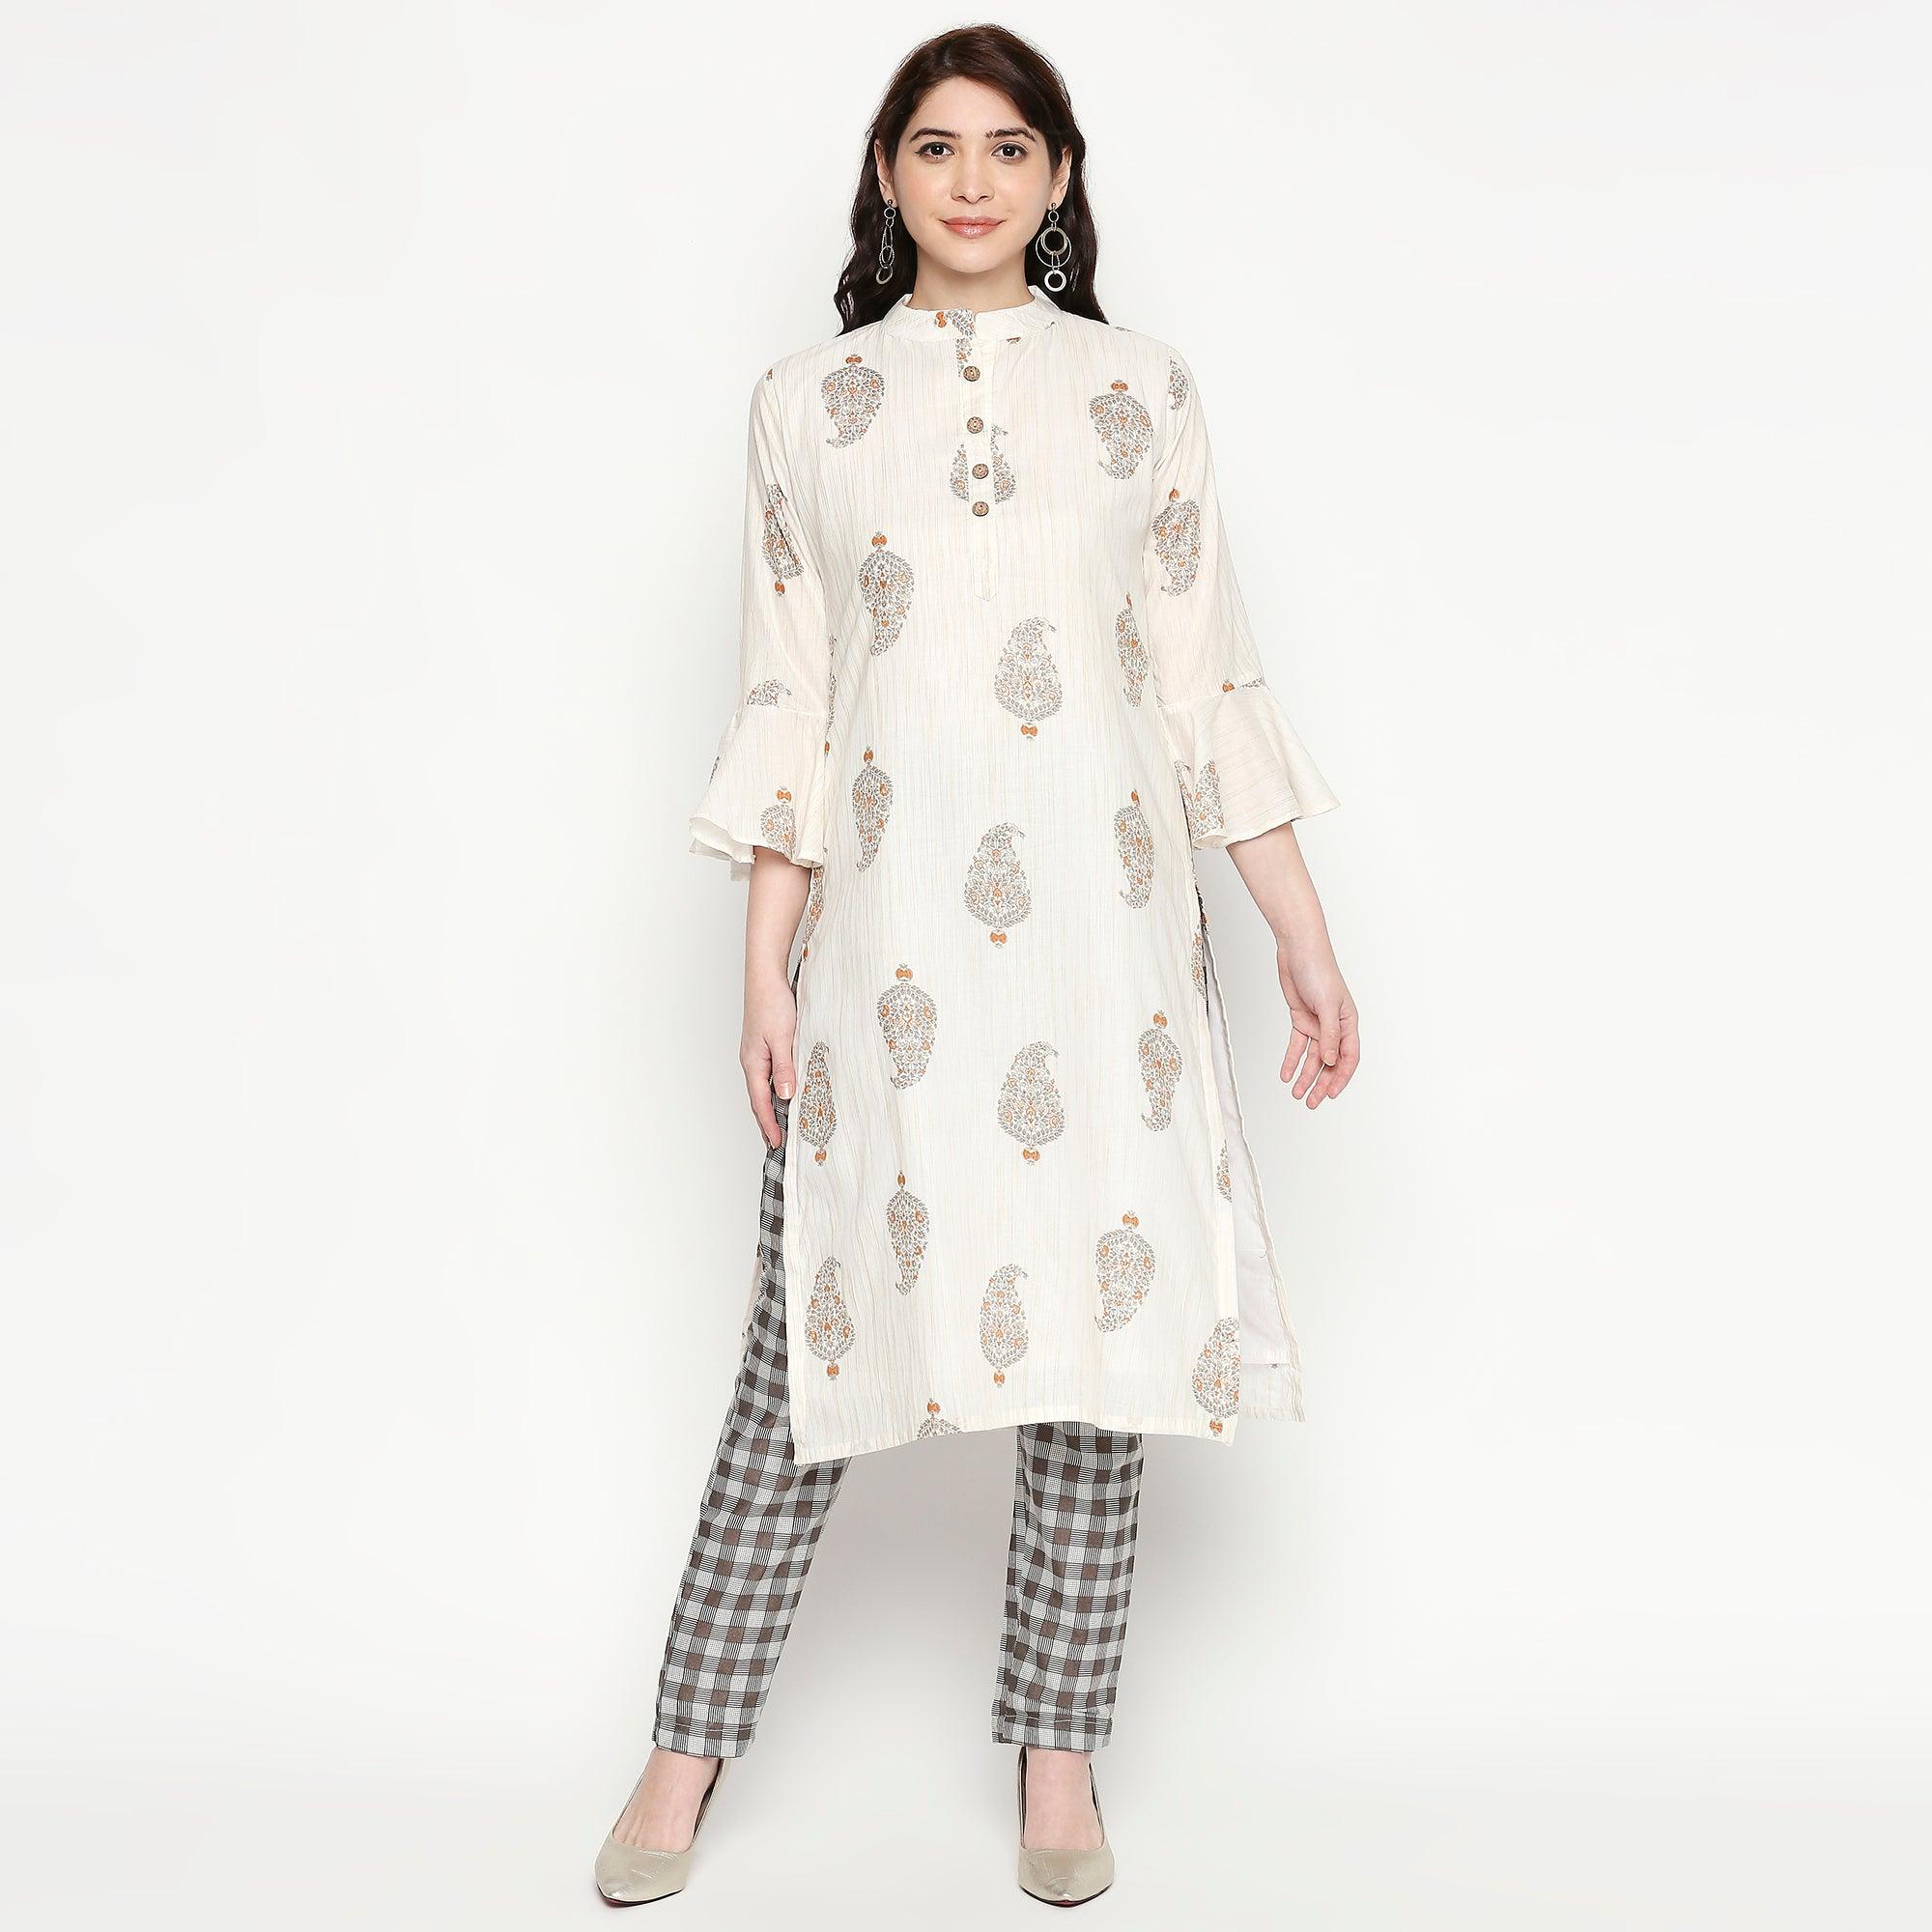 Engrossing White Colored Casual Wear Printed Cotton Kurti-Pant Set - Peachmode